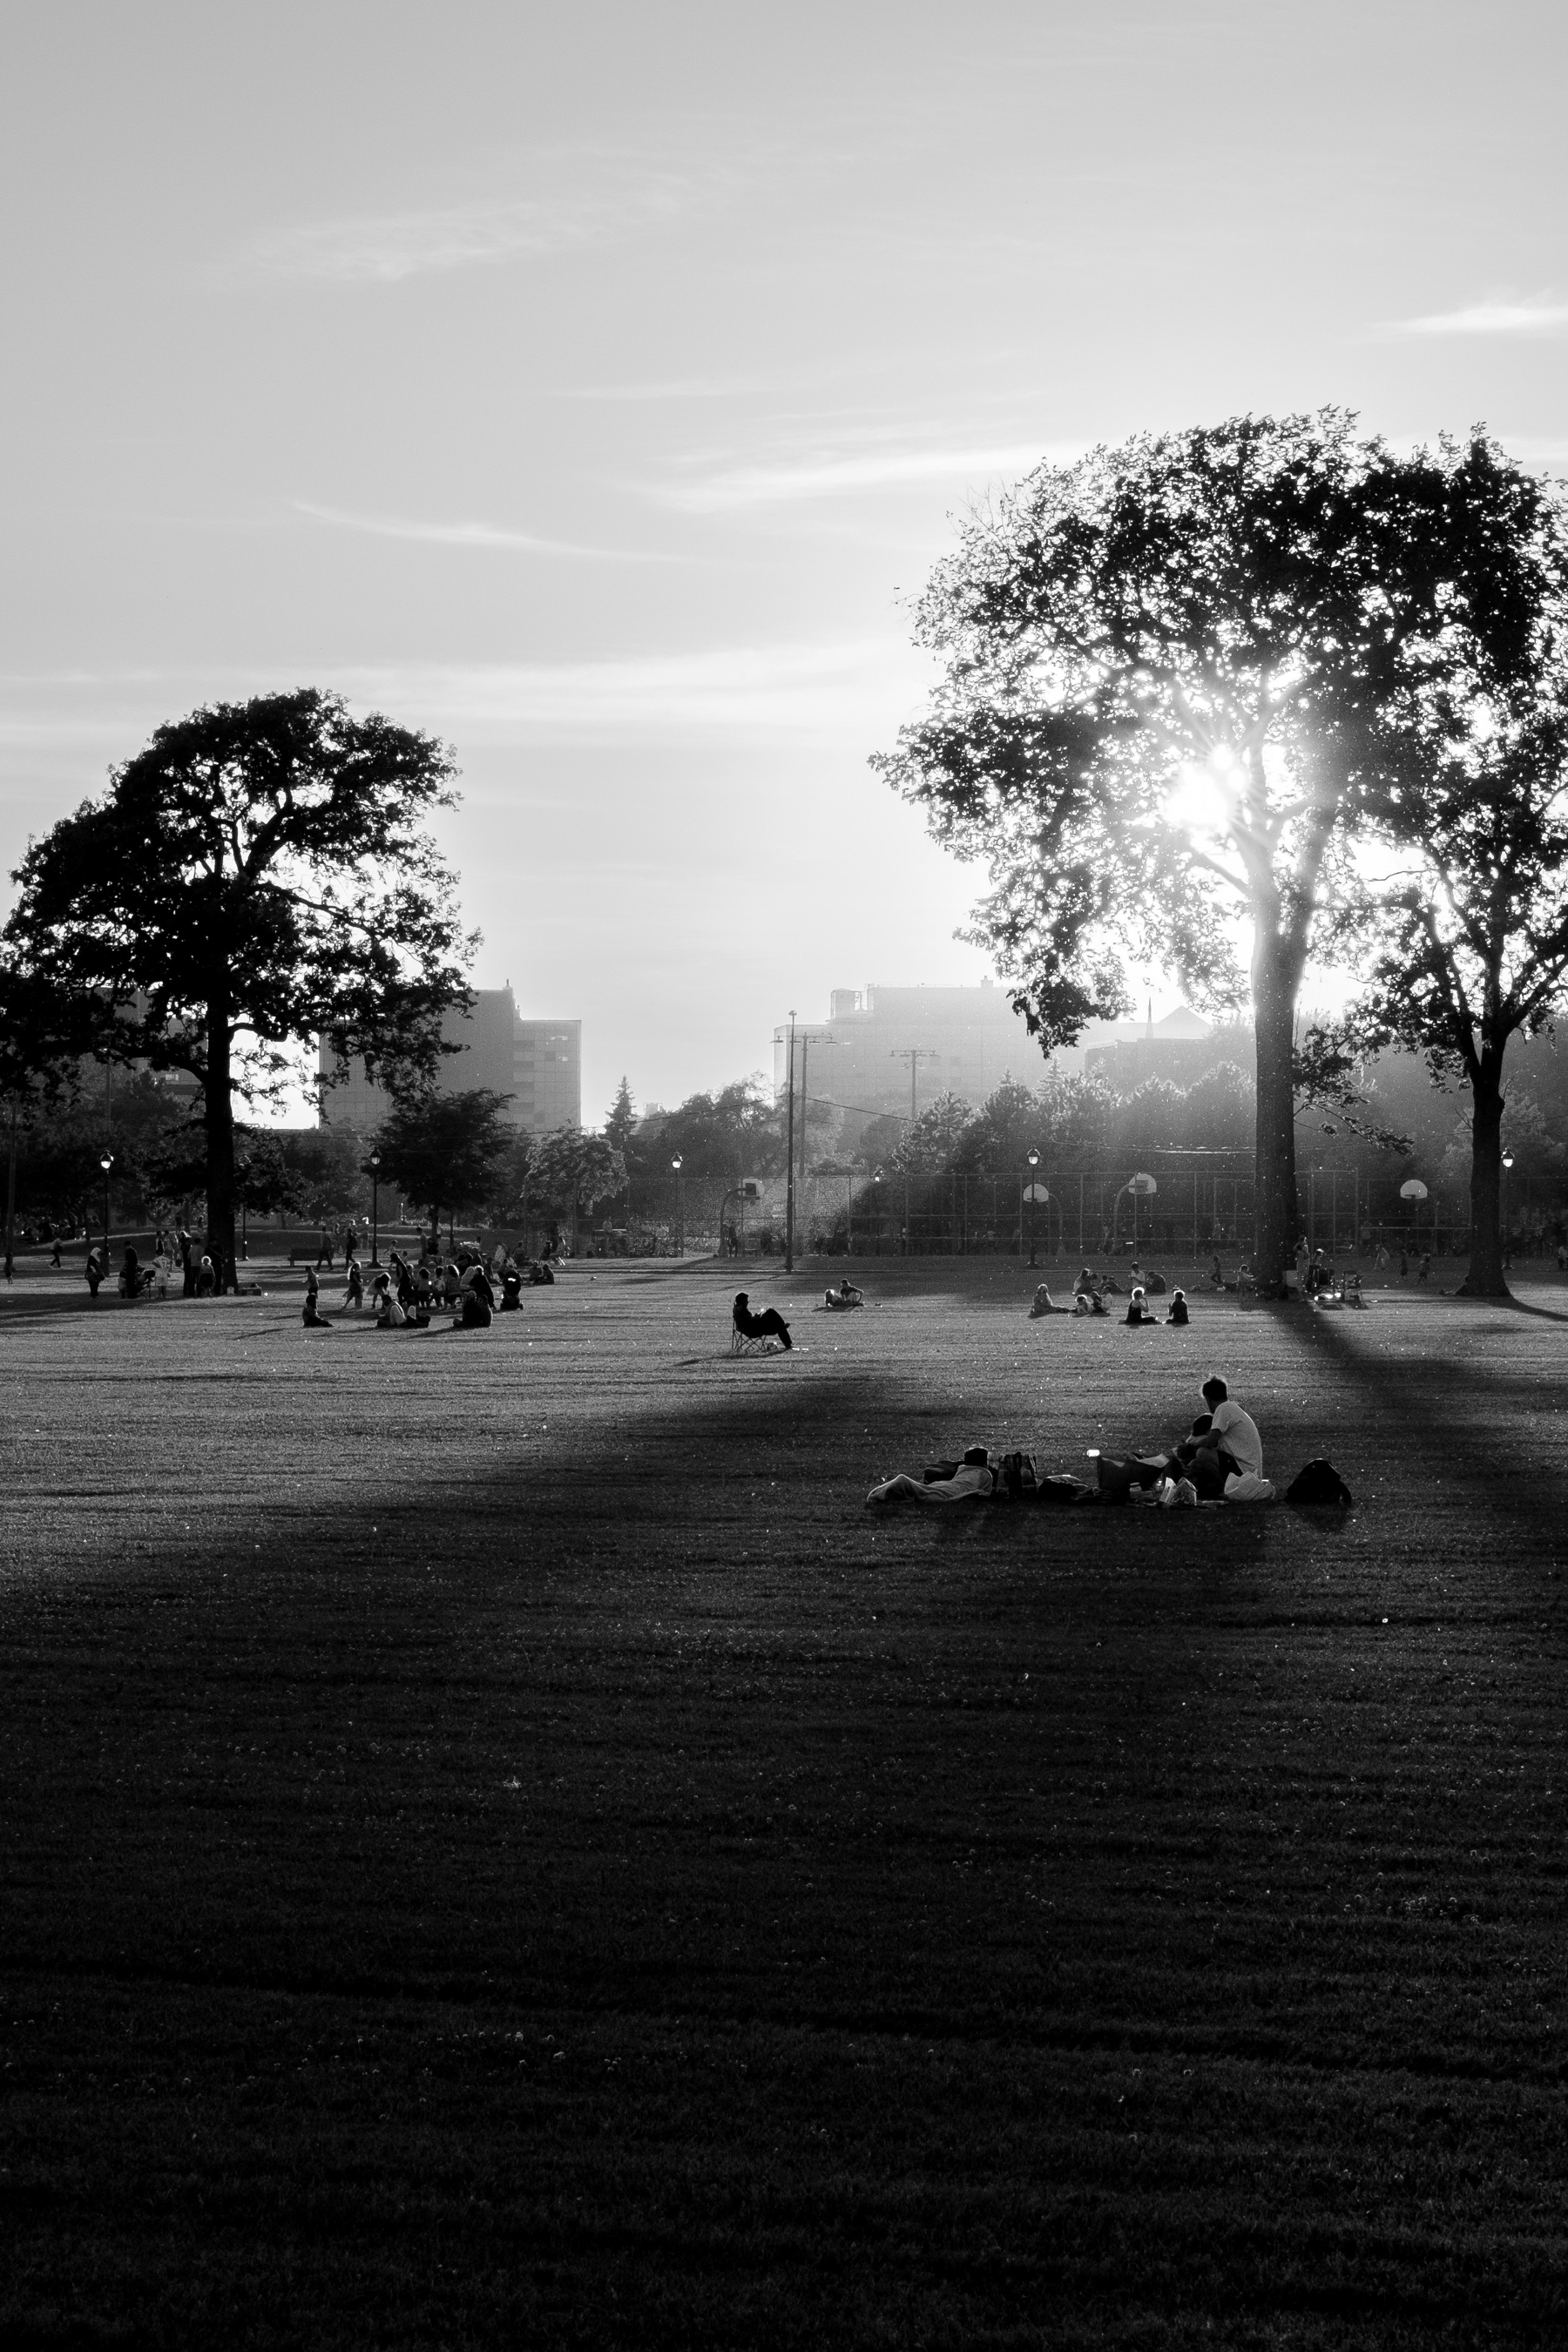 The shadows in the park are so sharp they’re almost geometric shapes. A man sits in a chair in the middle of the park.